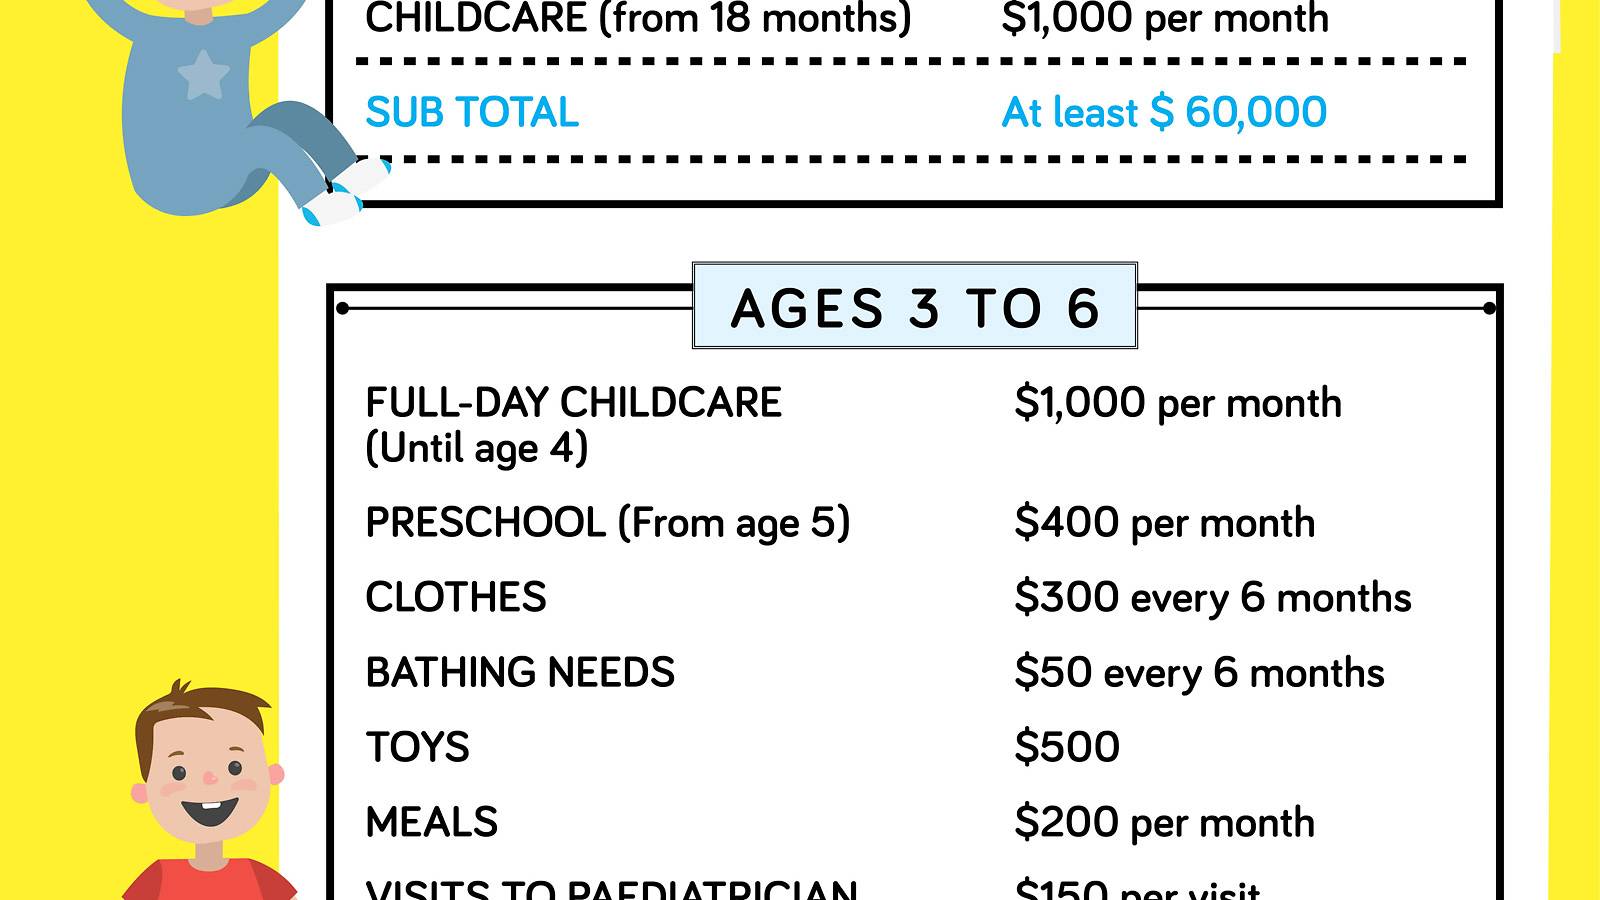 Parents-Raising-a-child-A-breakdown-of-the-figures-Infographic-5 (1)